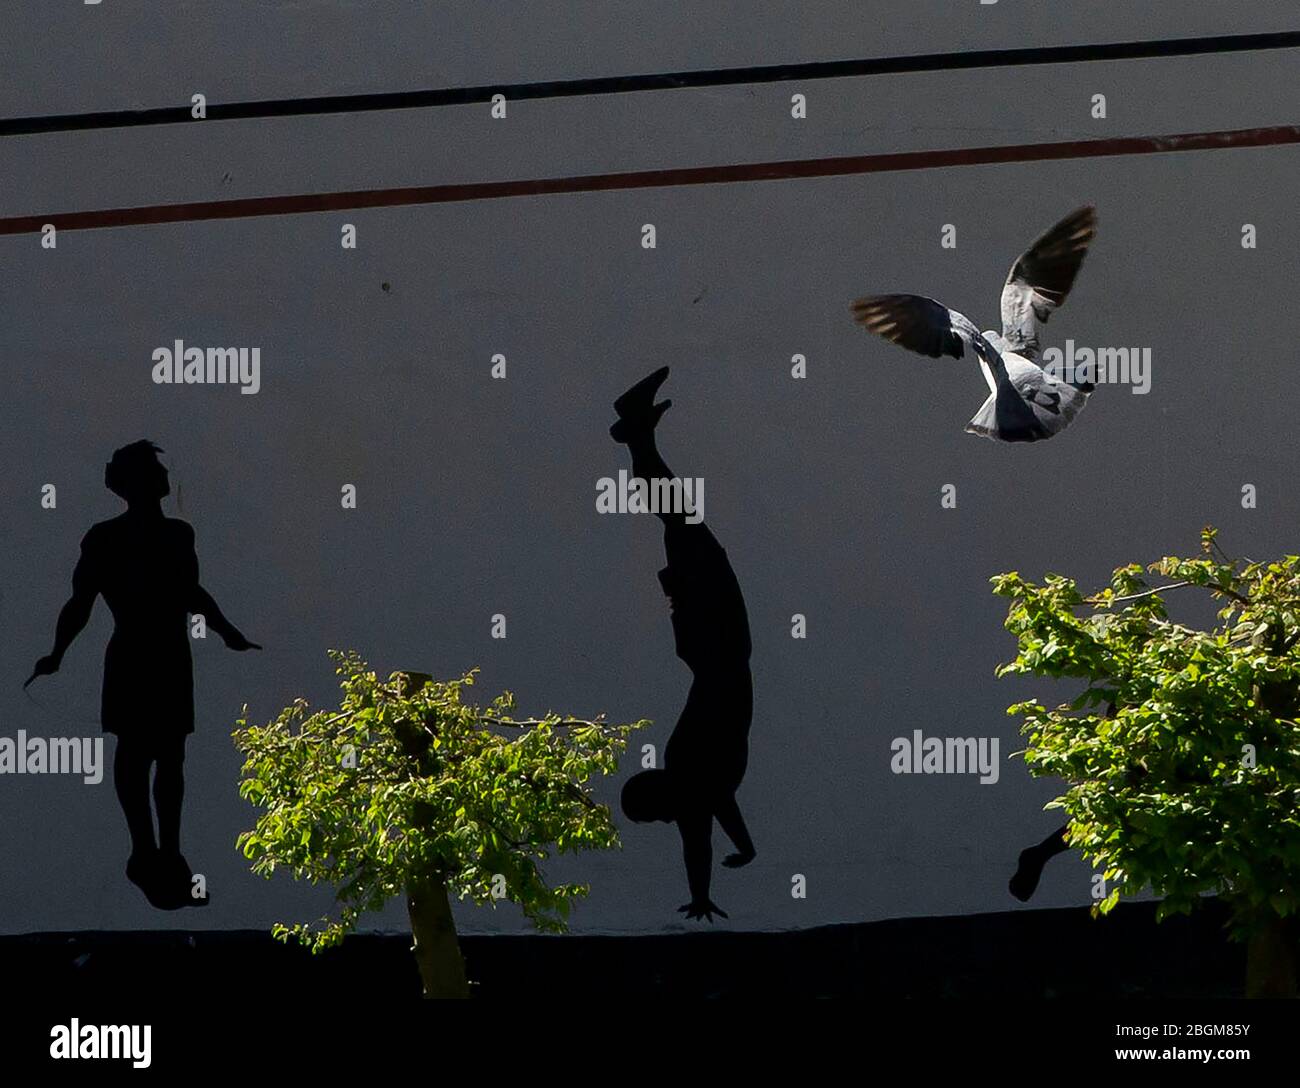 Pigeons in flight with wall art exercisers Stock Photo